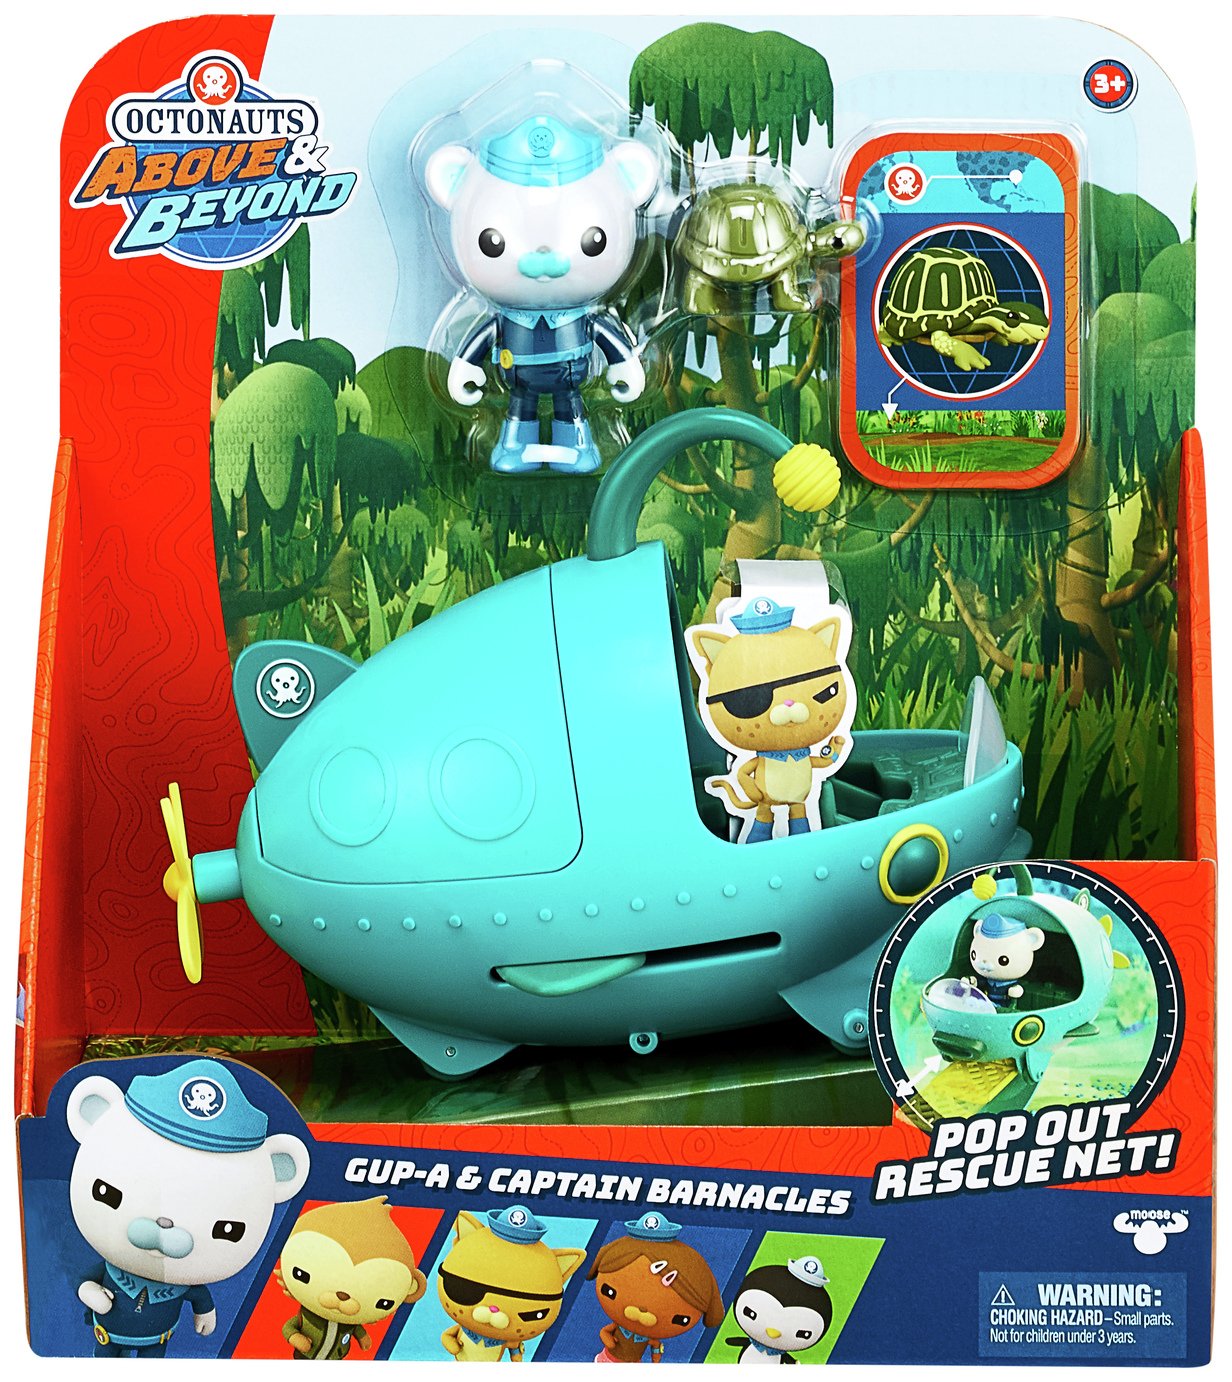 Octonauts Series1 Figure and Vehicle Barnacles & Gup A